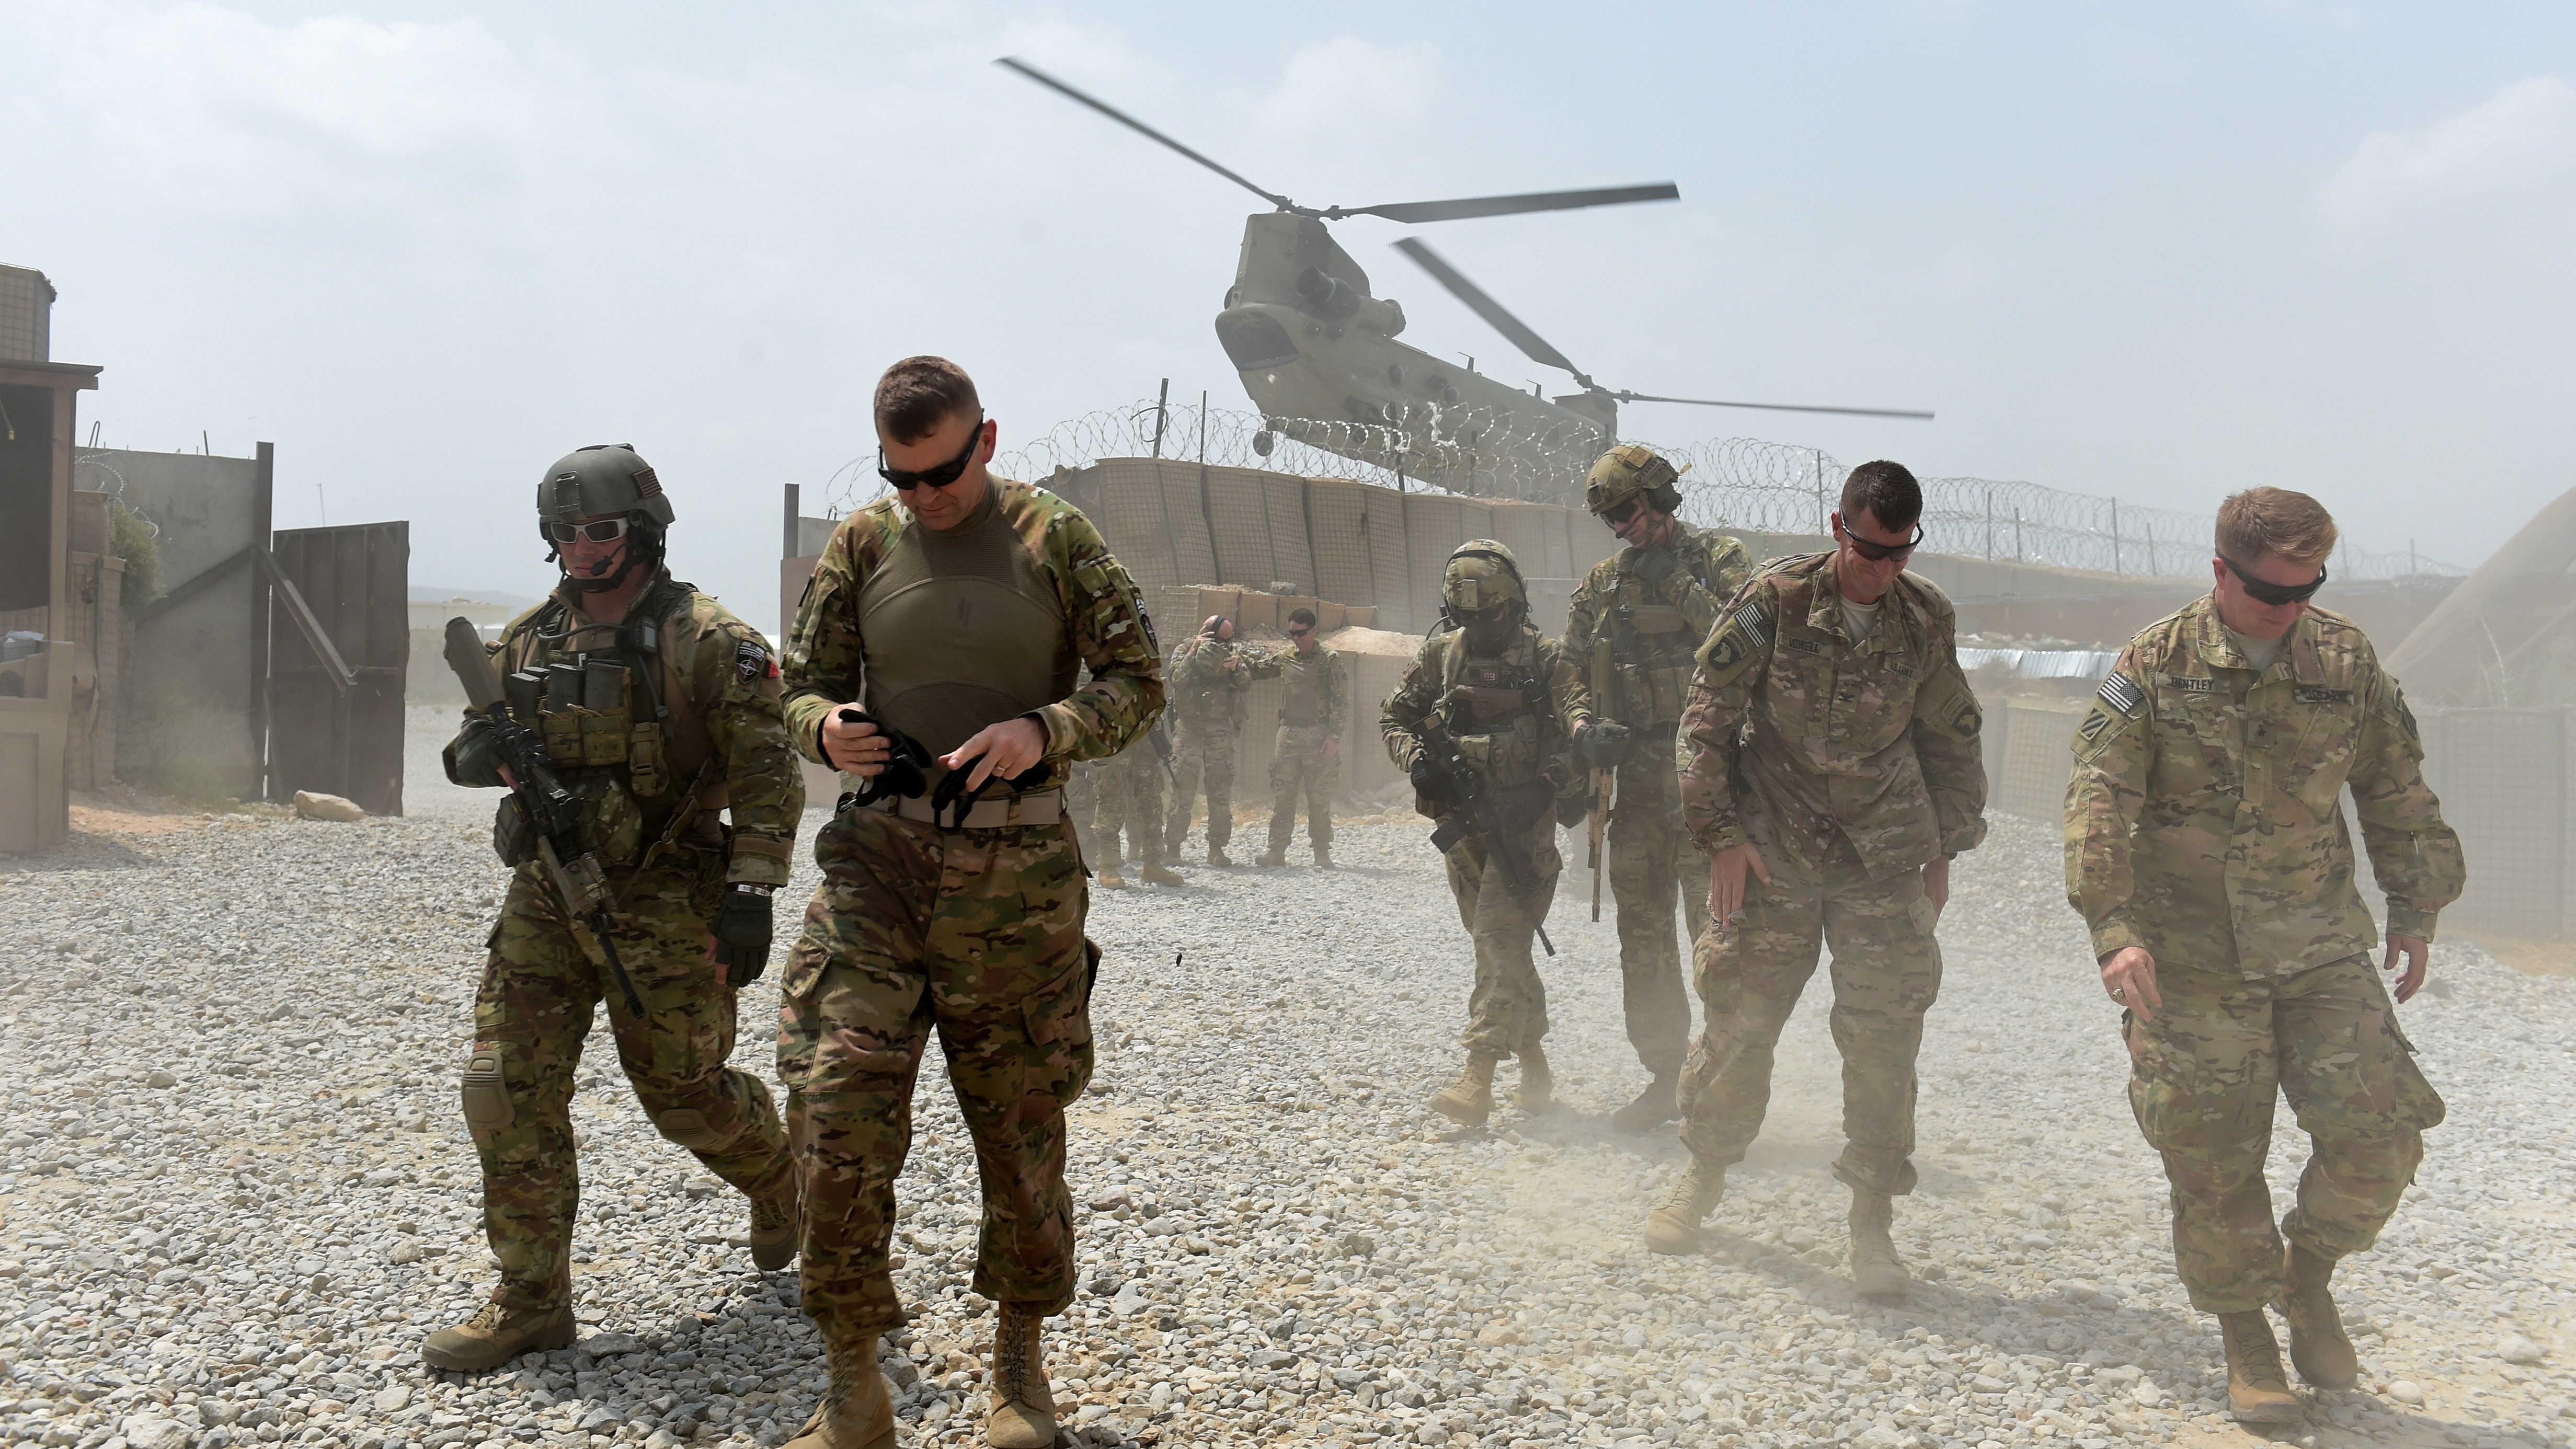 U.S. Army soldiers walk as a NATO helicopter flies overhead at coalition force Forward Operating Base (FOB) Connelly in the Khogyani district in the eastern province of Nangarhar on August 13, 2015. (Photo by Wakil Kohsar/AFP/Getty Images)